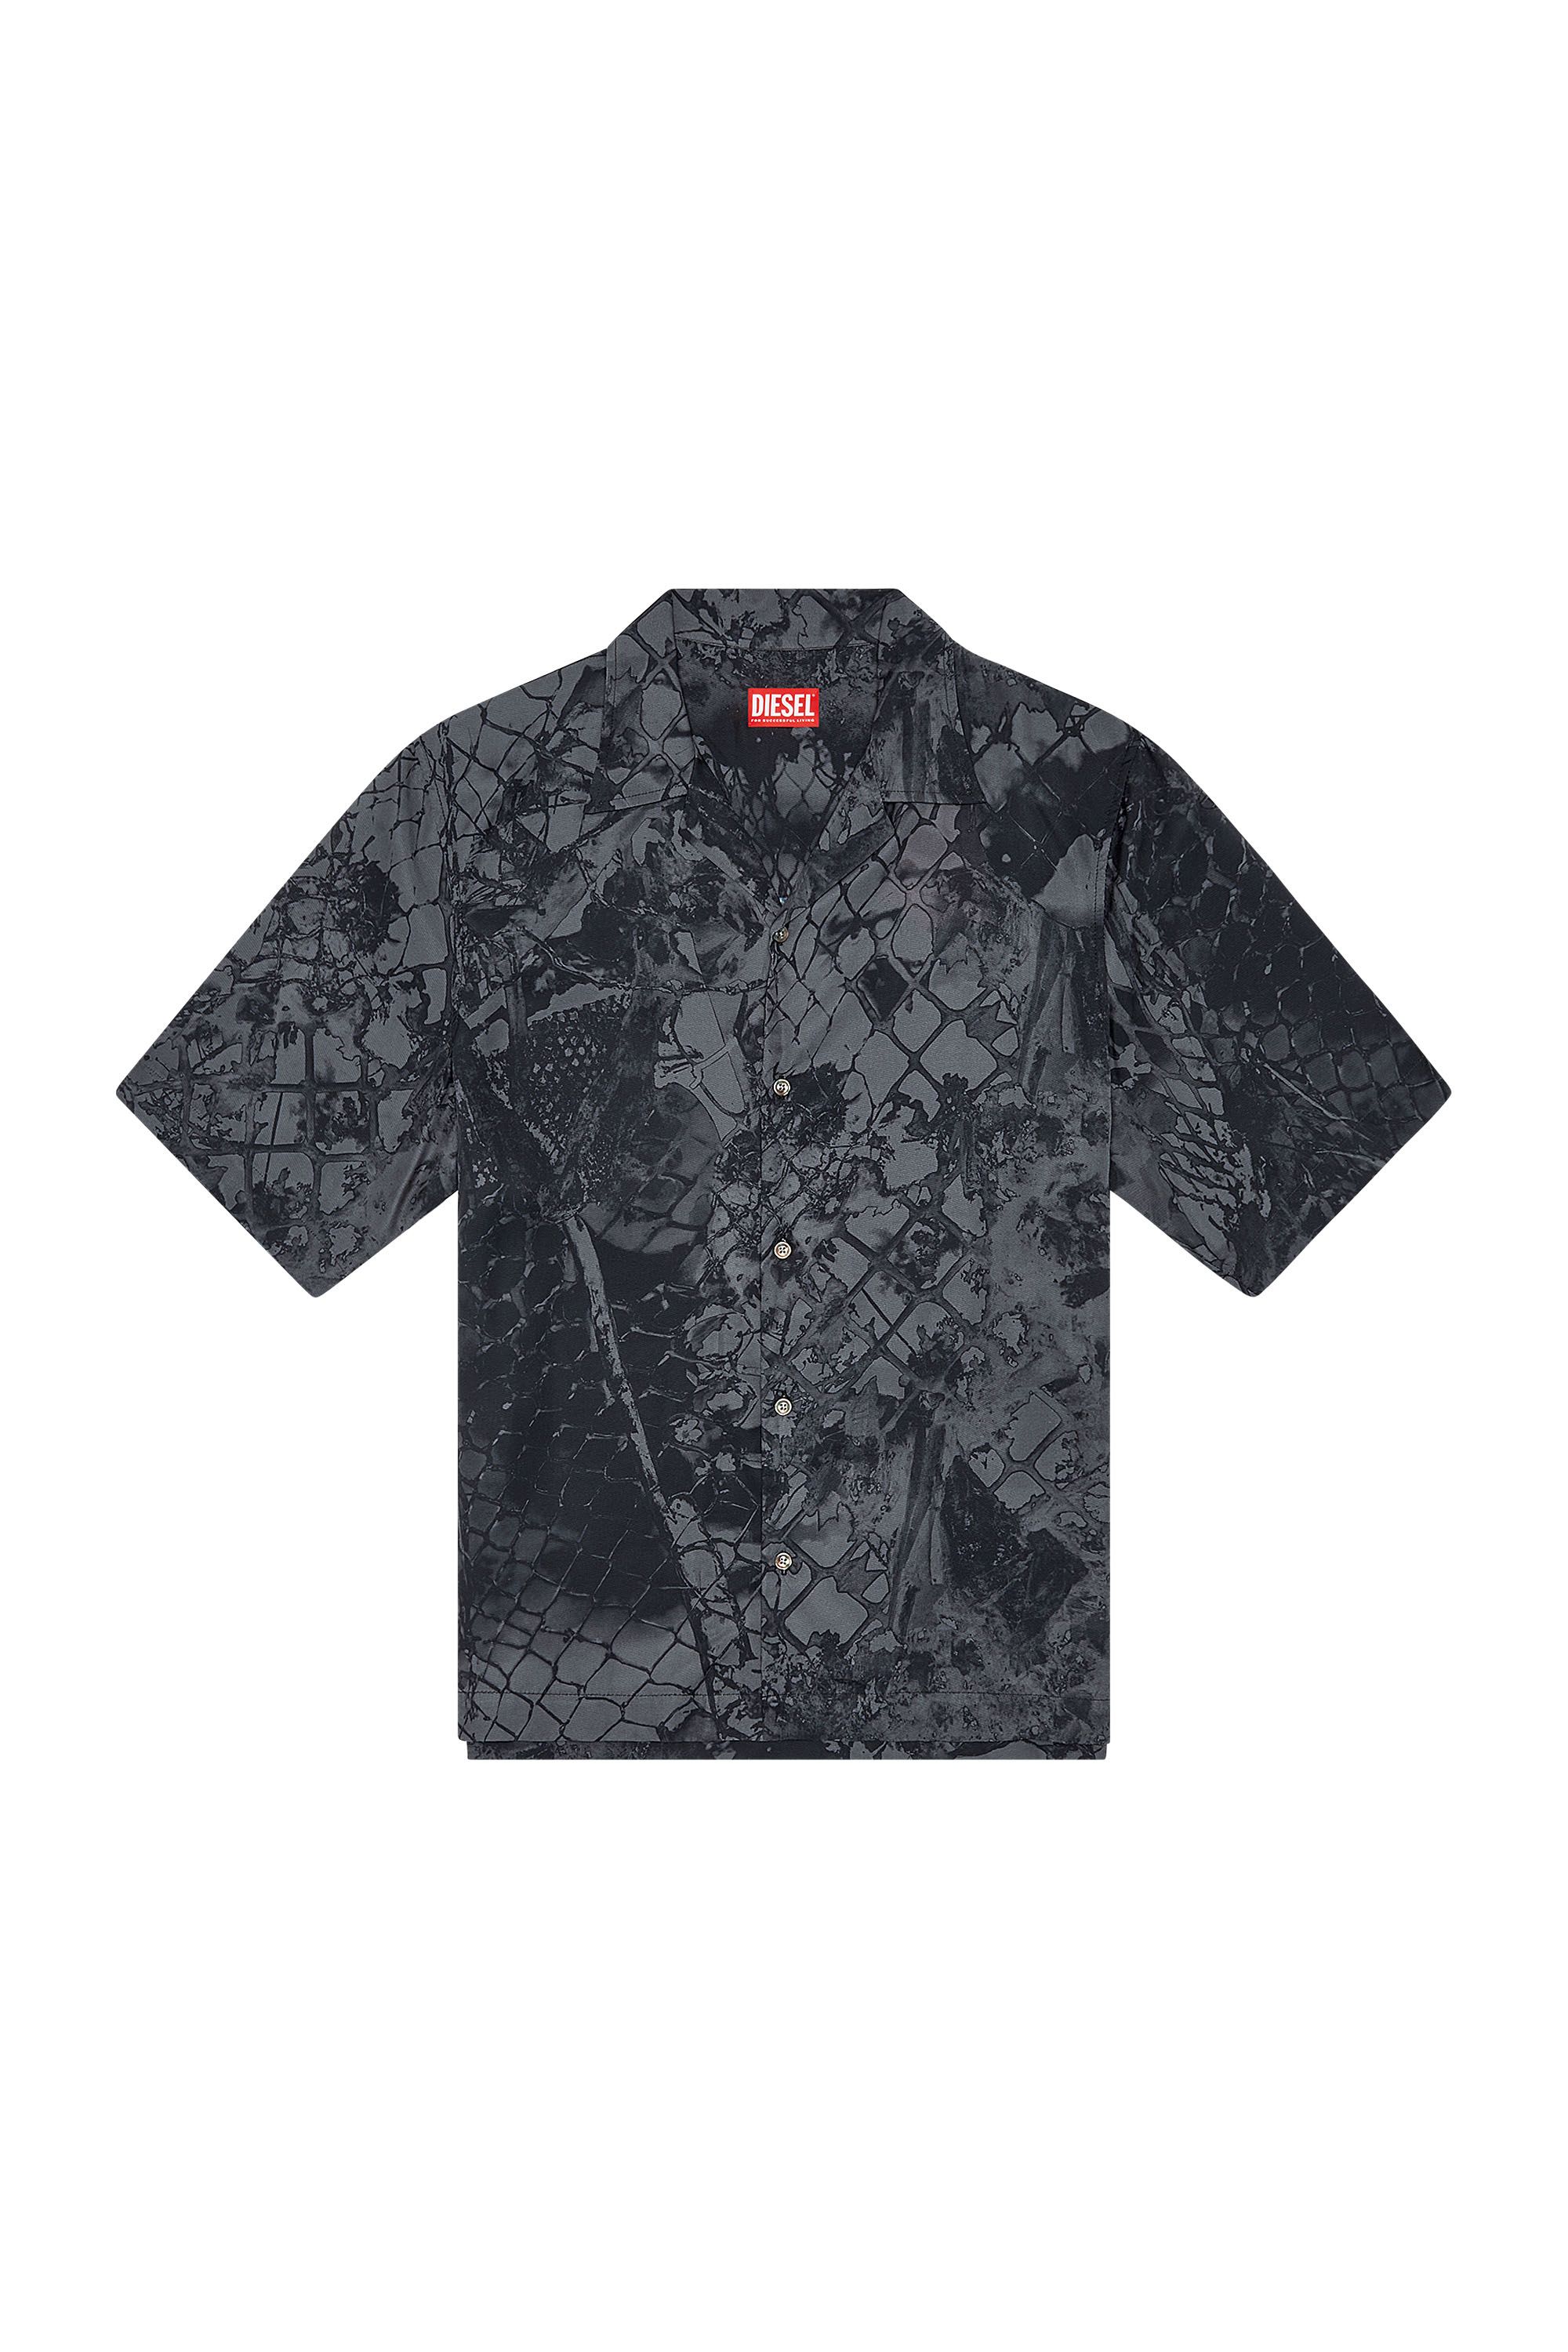 Supreme Rayon Vibrations Button up Shirt Red size Large